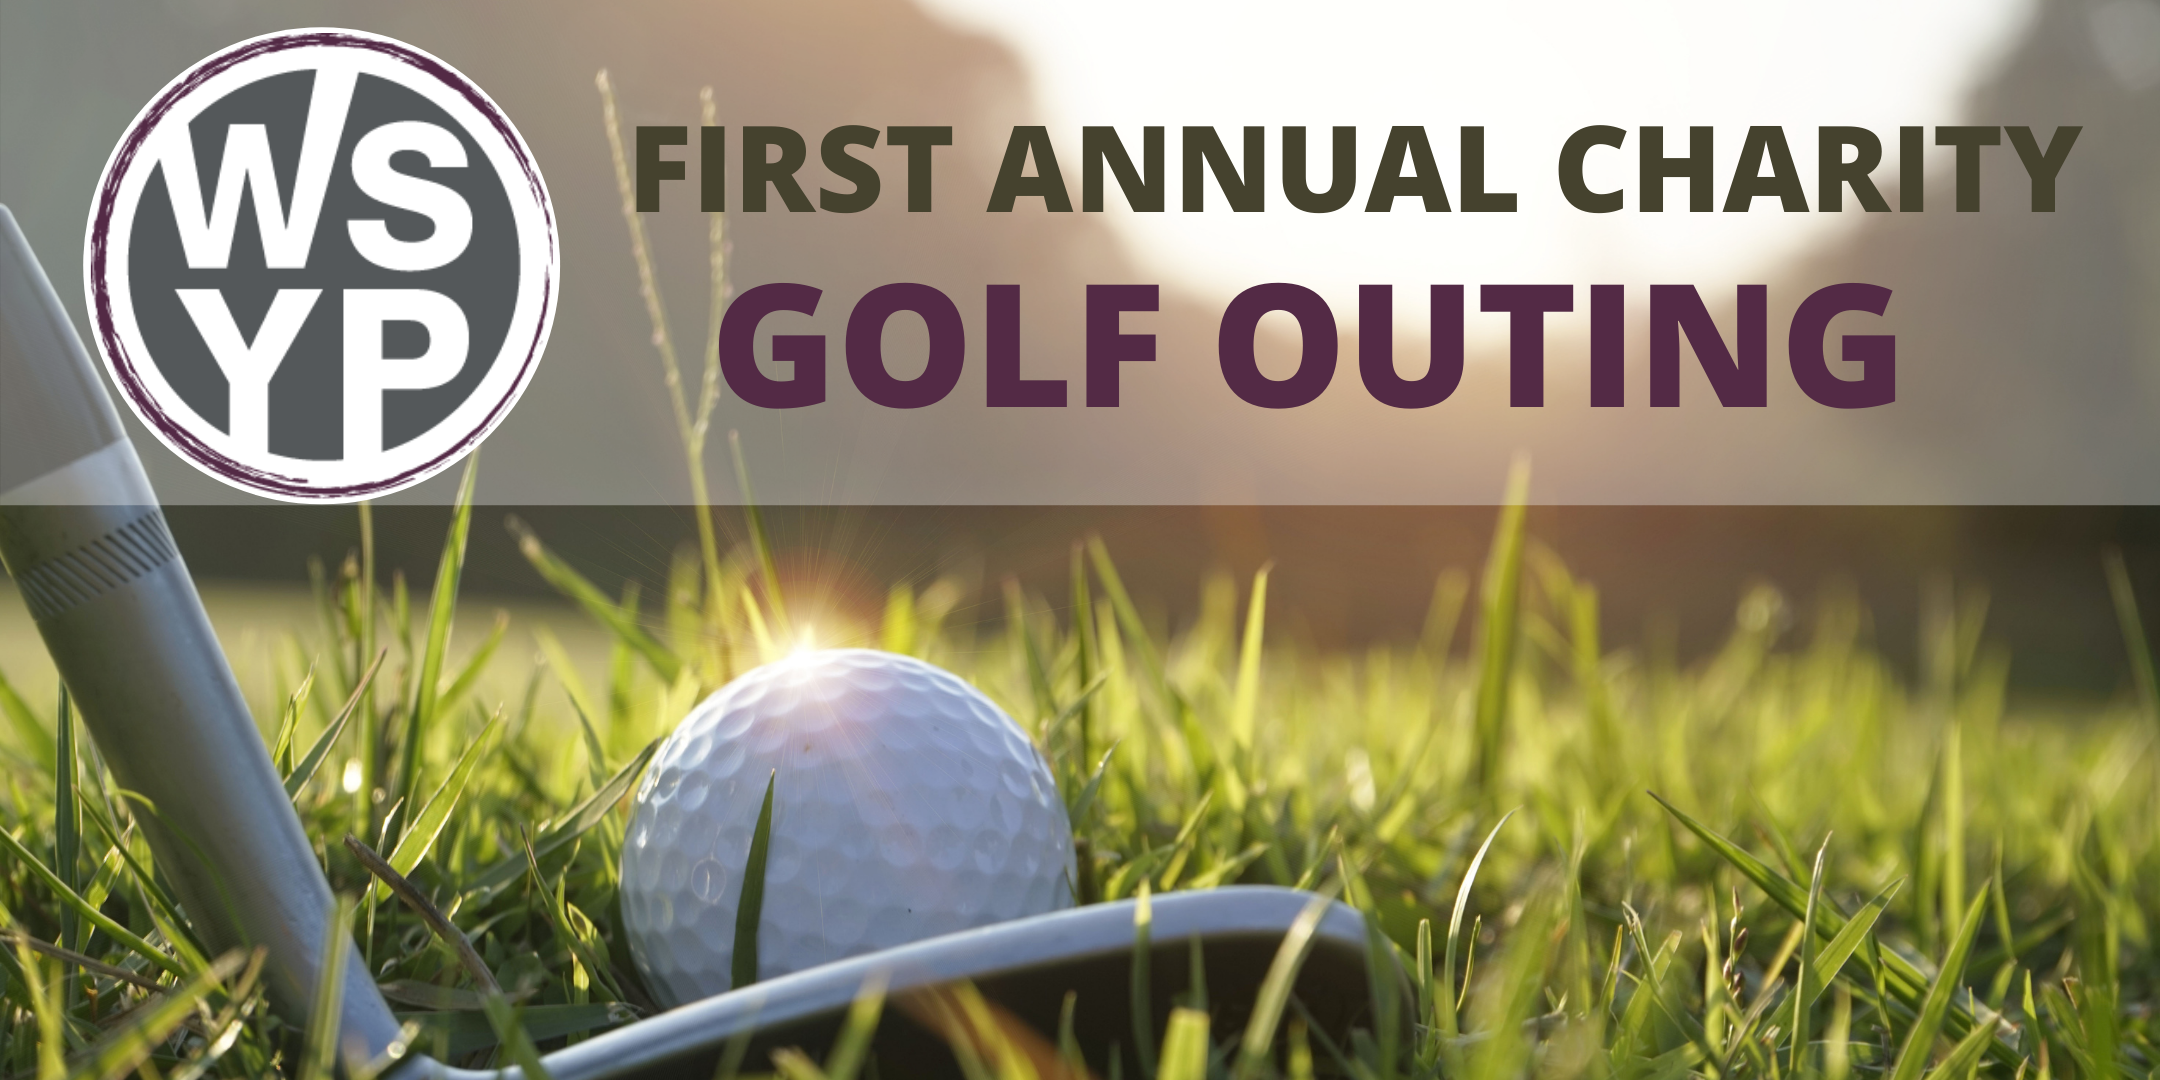 First Annual Charity Golf Outing